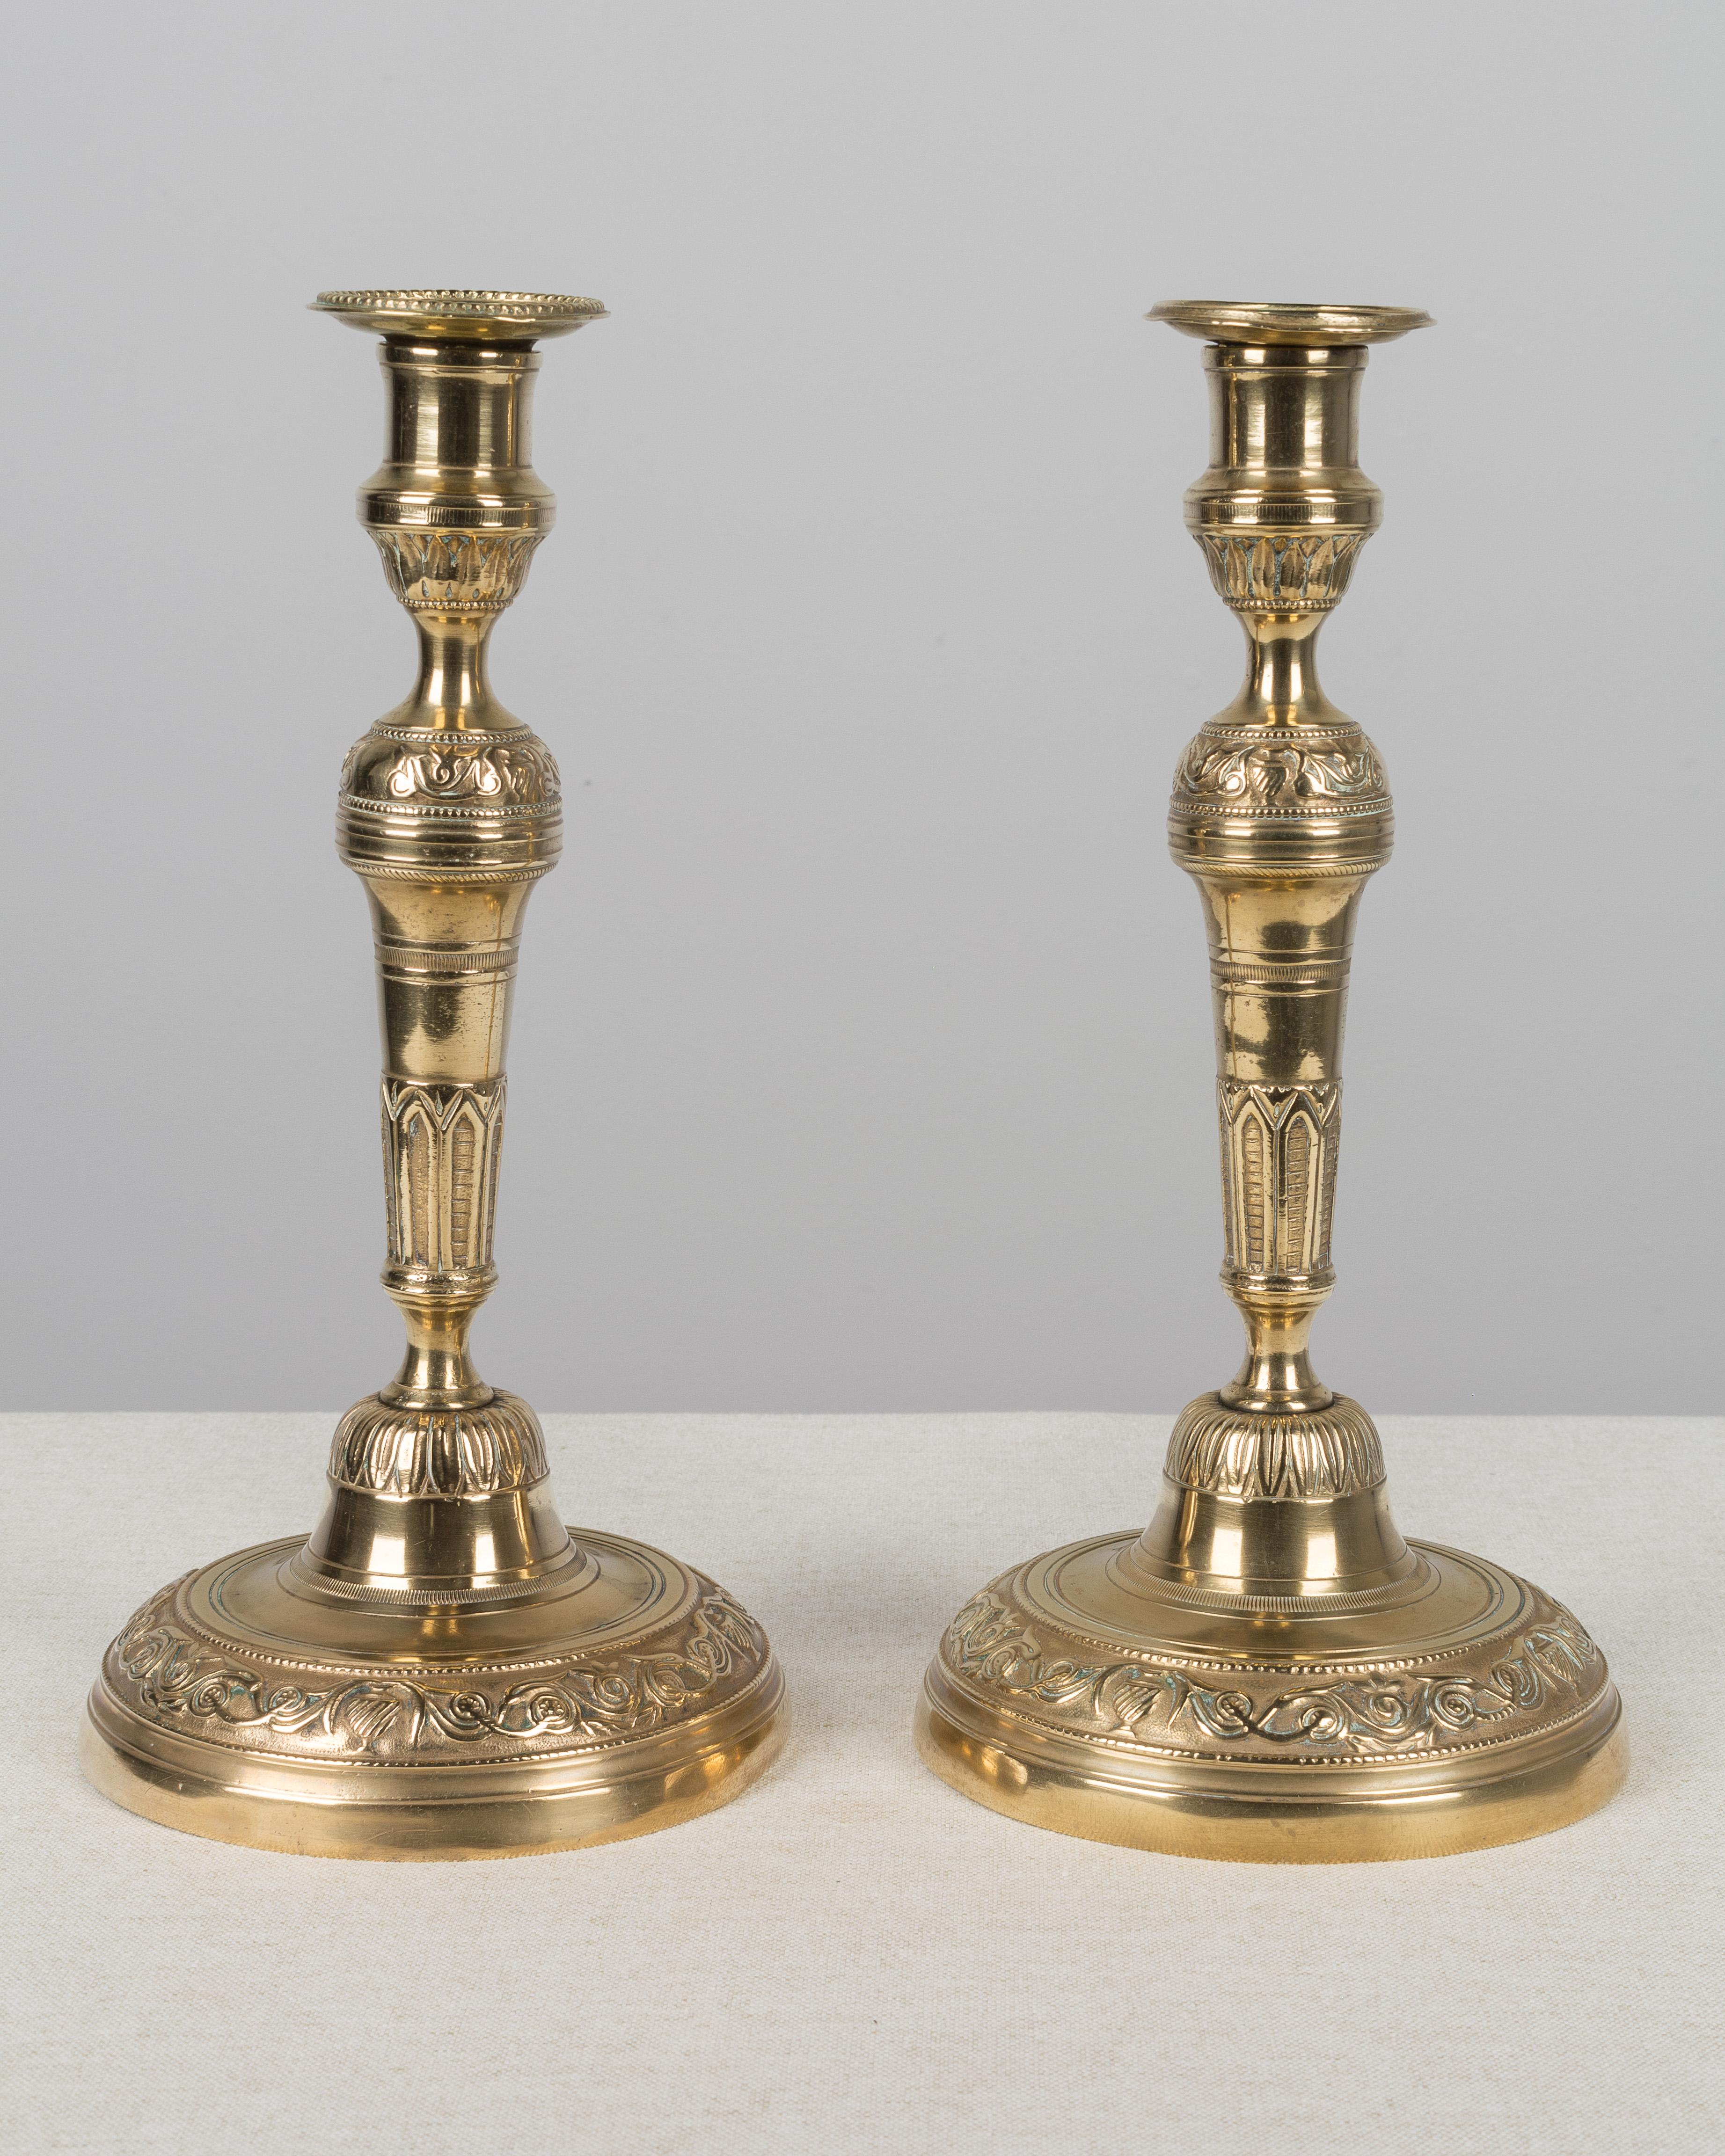 Pair of French Louis XVI style polished brass candlesticks. The bases are slightly dented. The bobeches are slightly different.